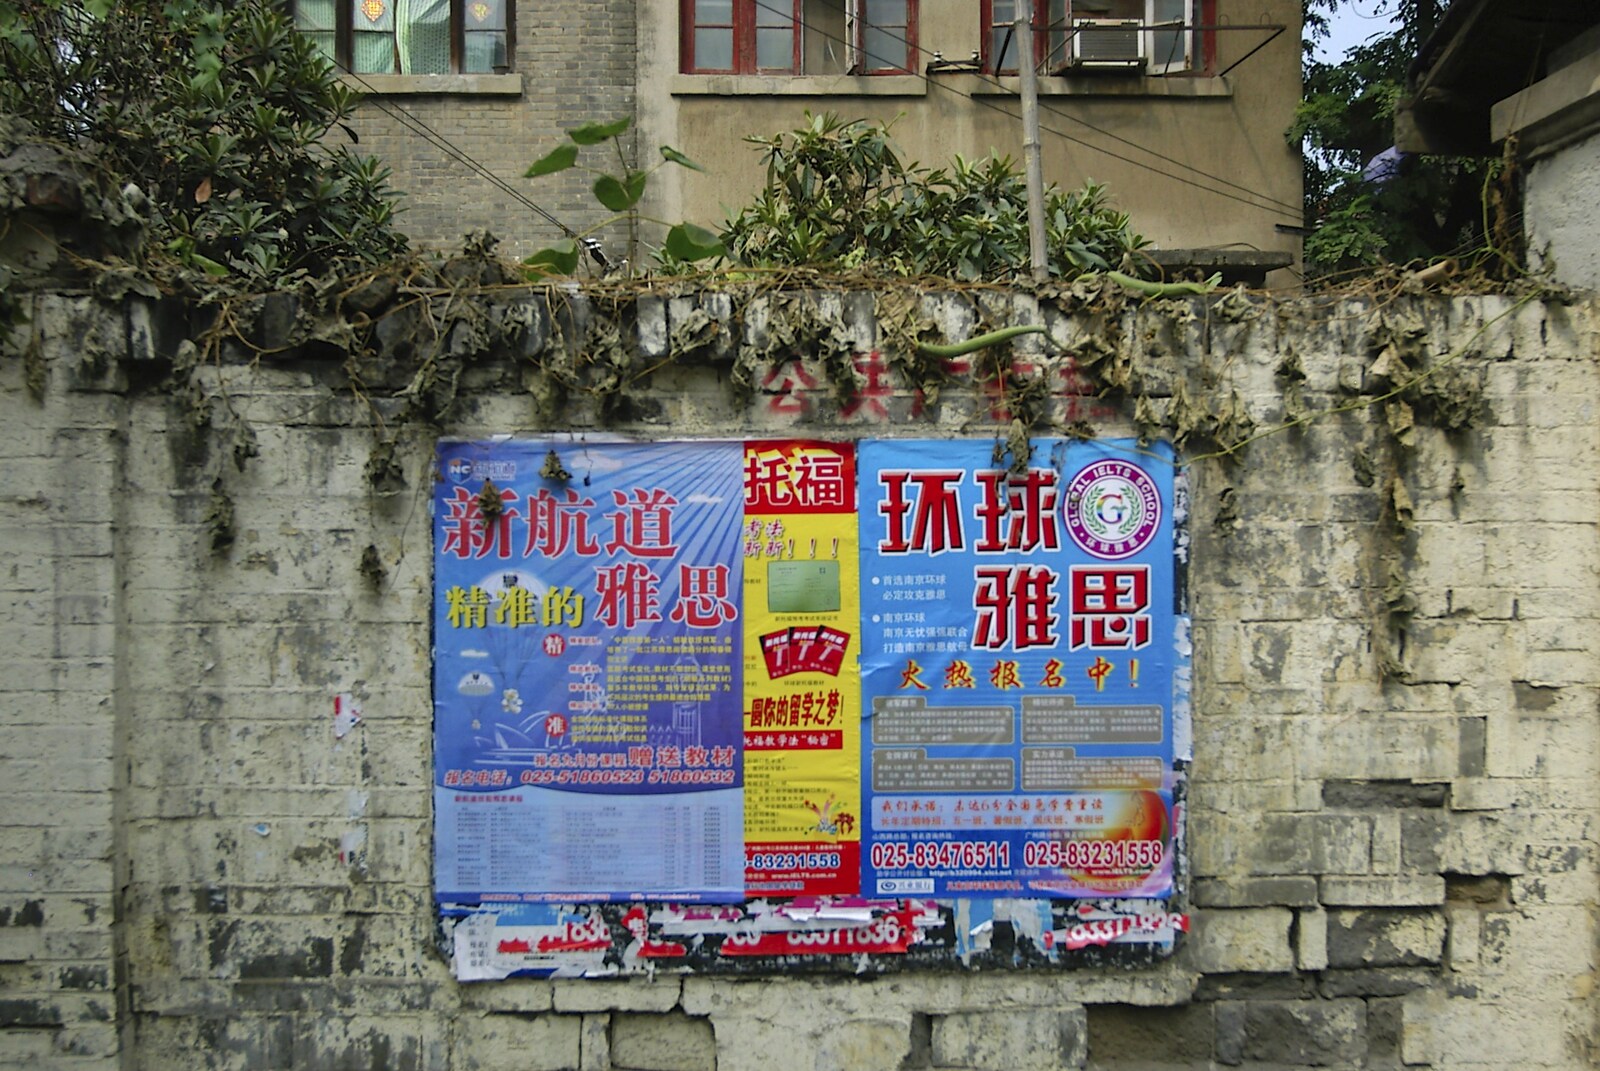 A bright poster in a sea of beige from A Few Days in Nanjing, Jiangsu Province, China - 7th October 2006